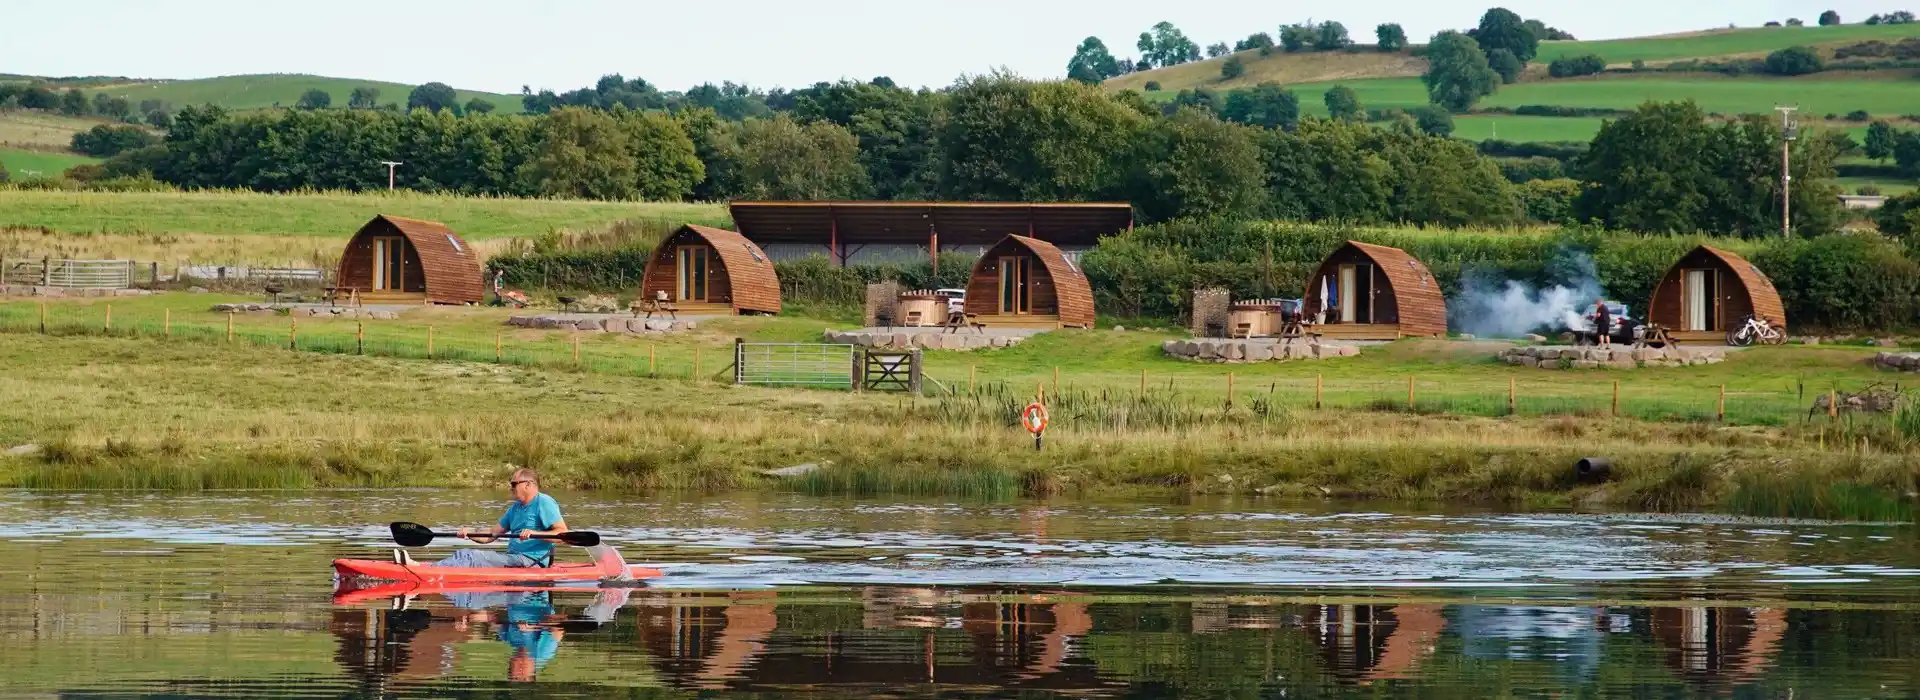 Glamping in Brecon Beacons